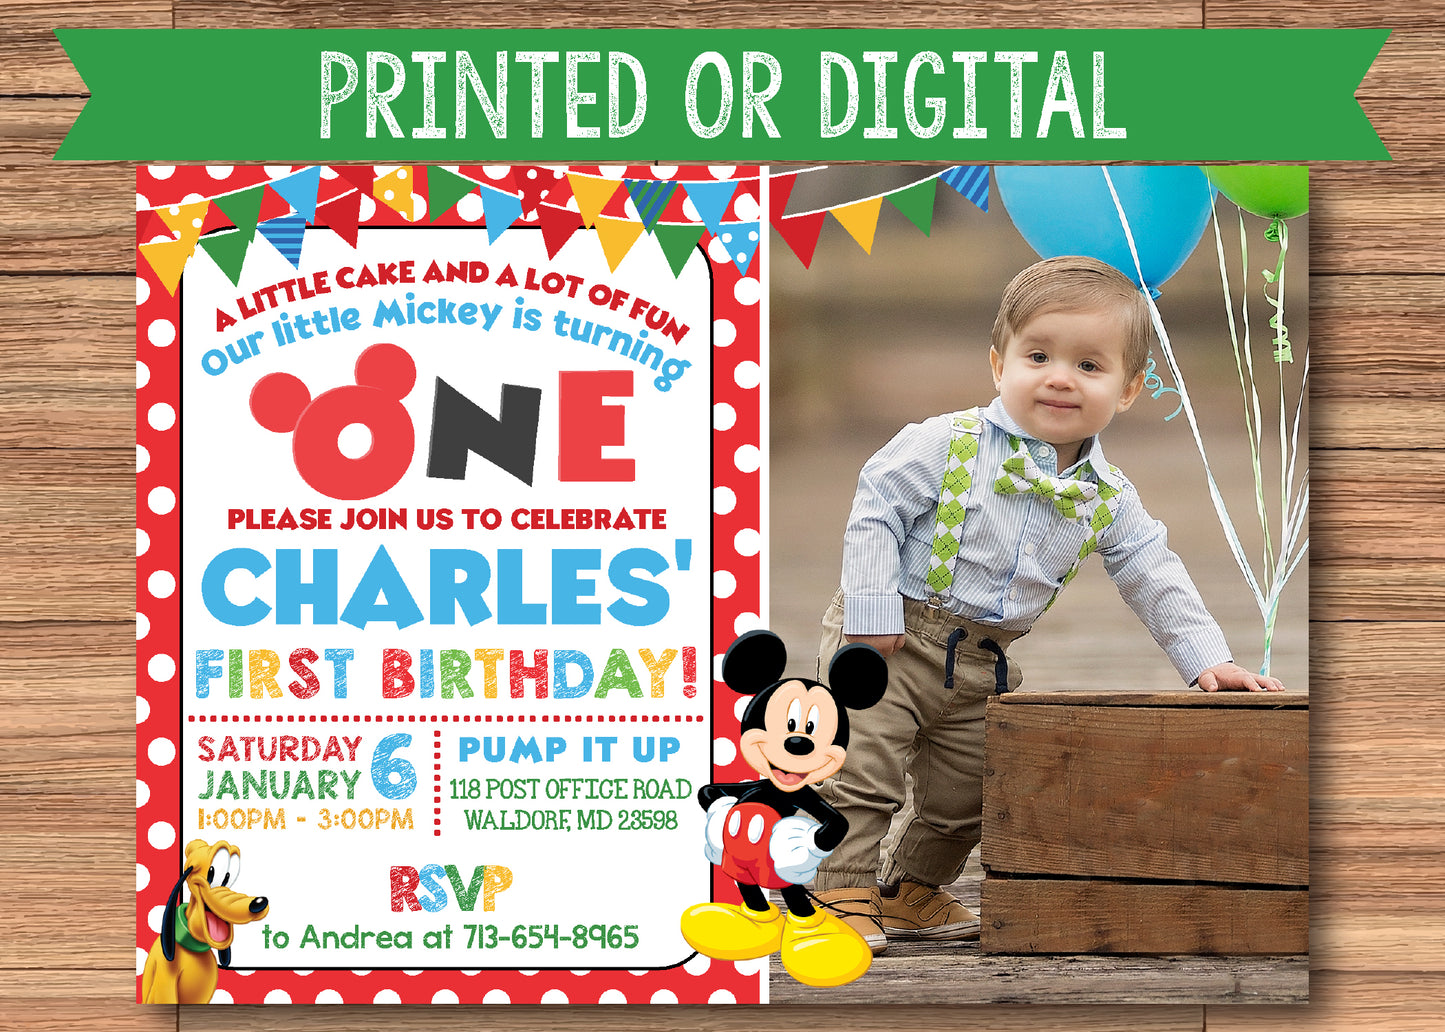 RED Polka-dot MICKEY MOUSE Birthday Invitation with Photo! Printed or Digital!